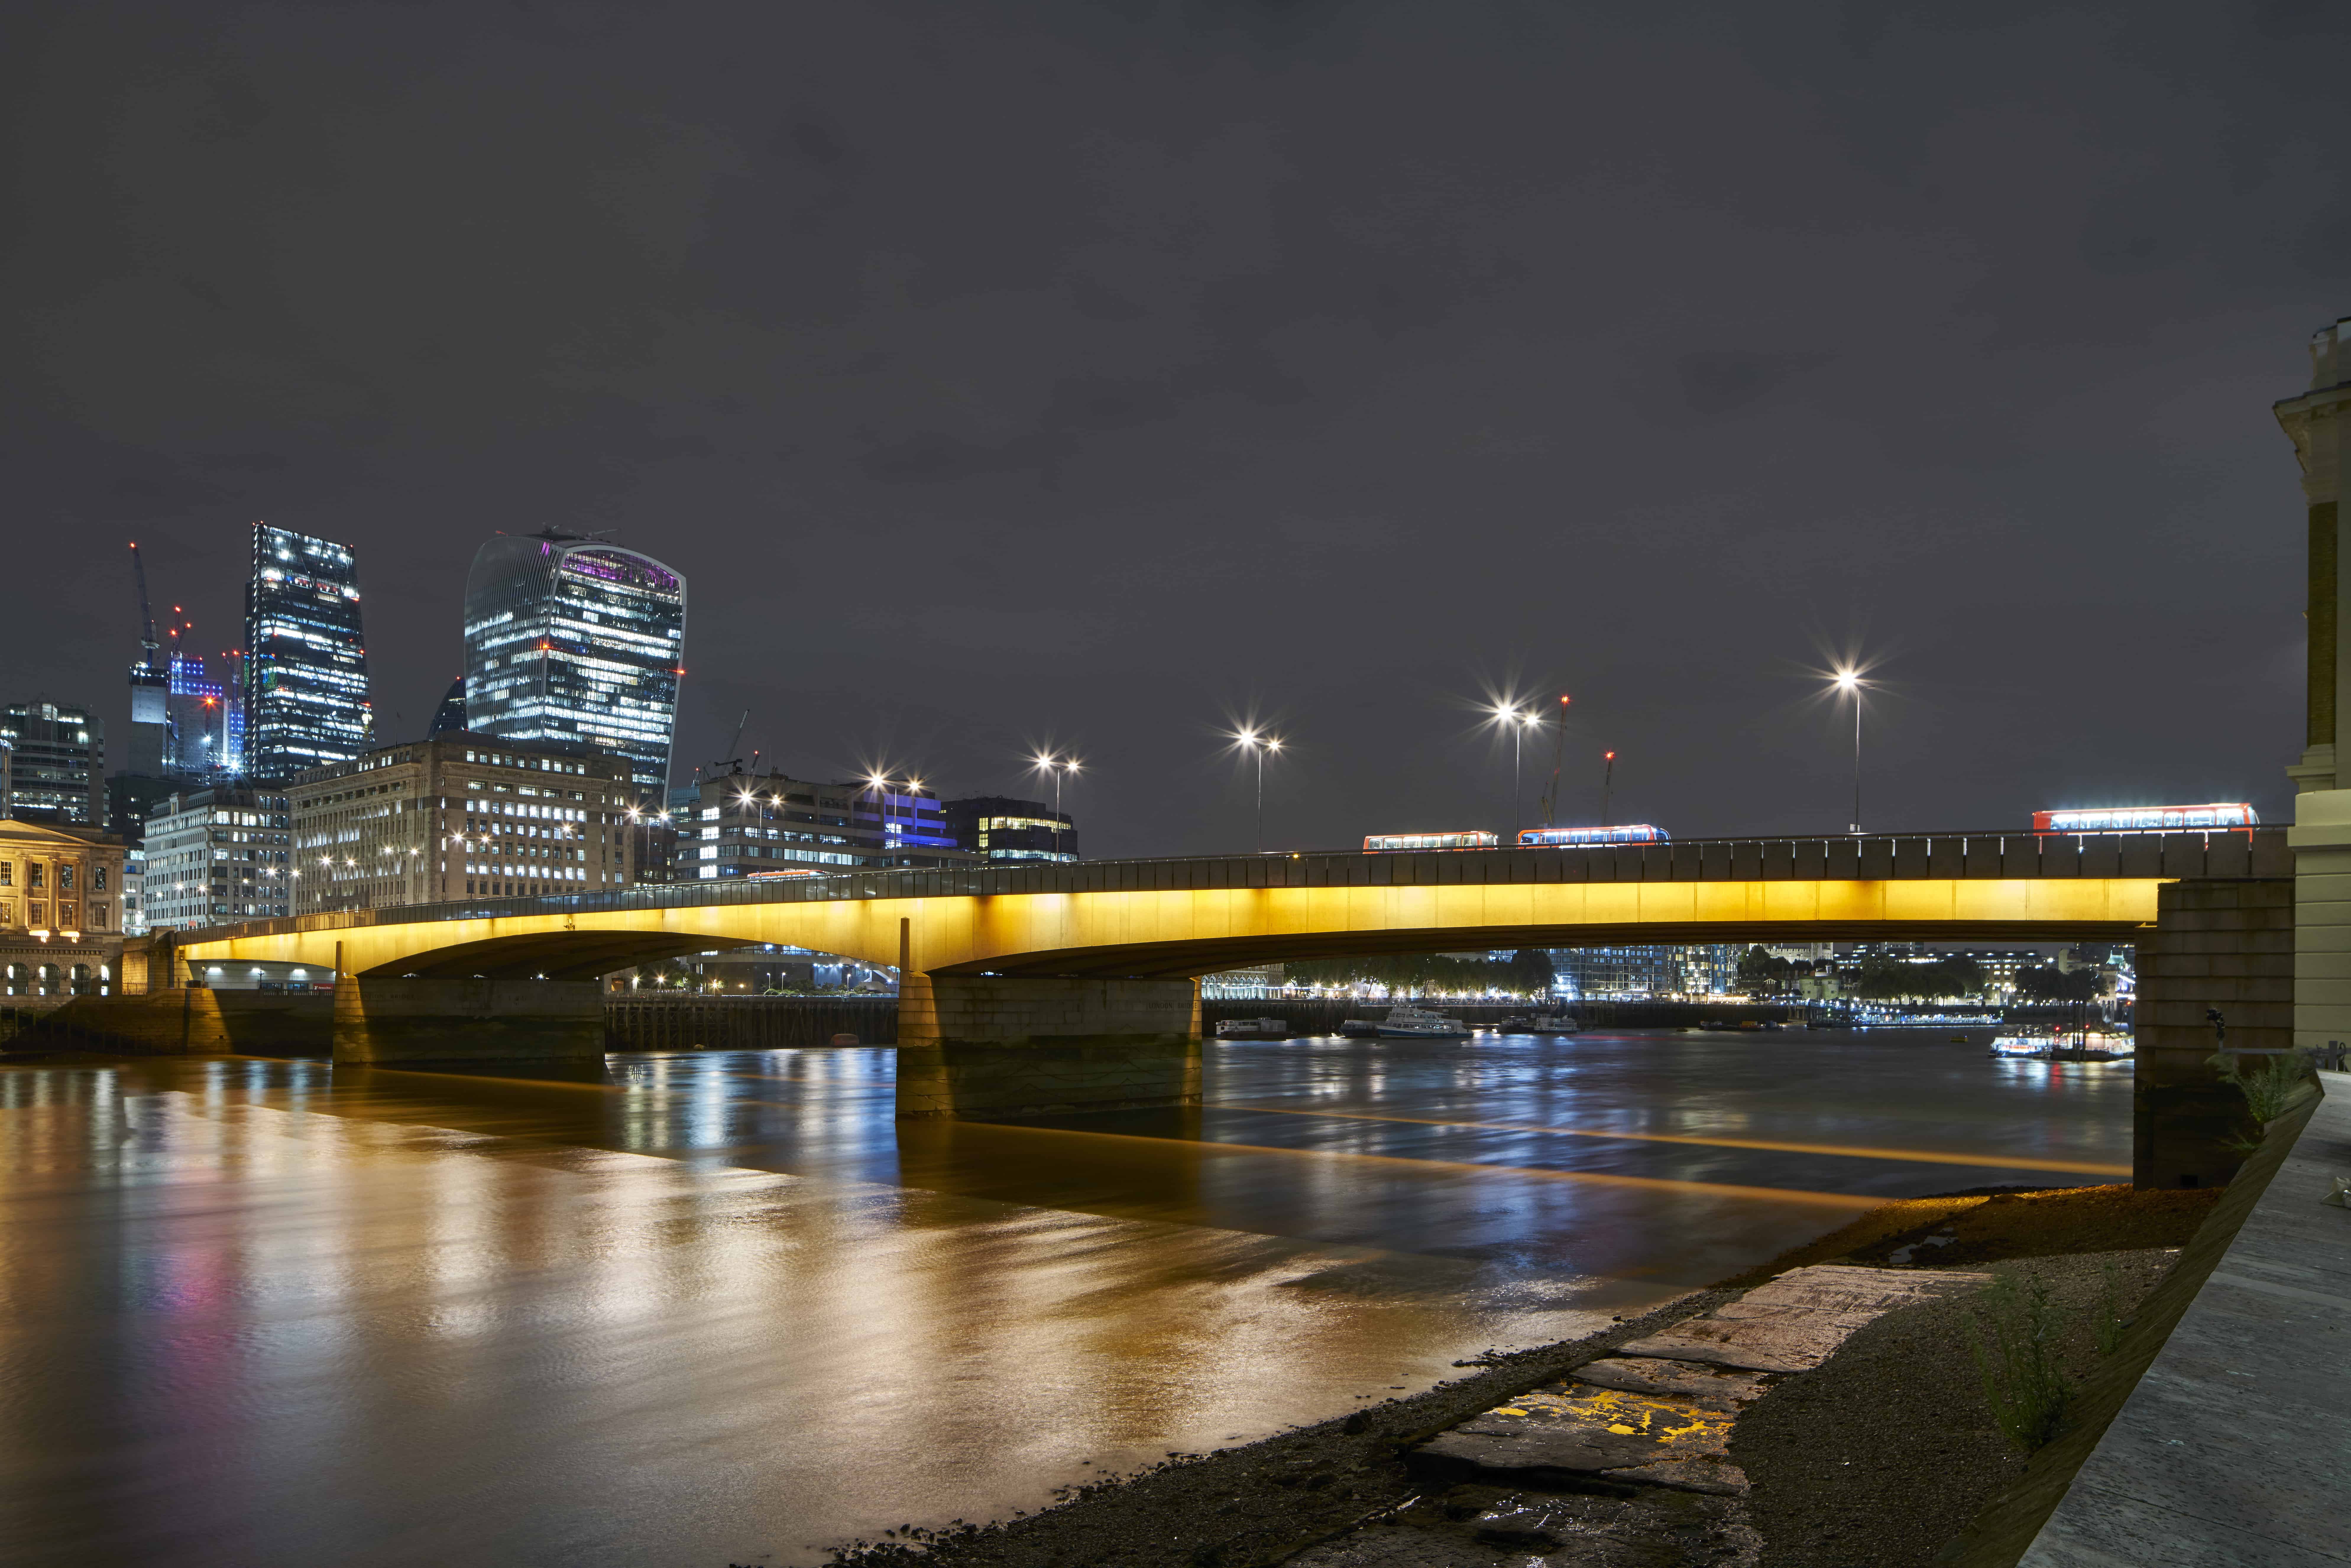 London Bridge is one of the four to be given the artistic makeover s part of Illuminated River's first phase (Image: Paul Riddell)